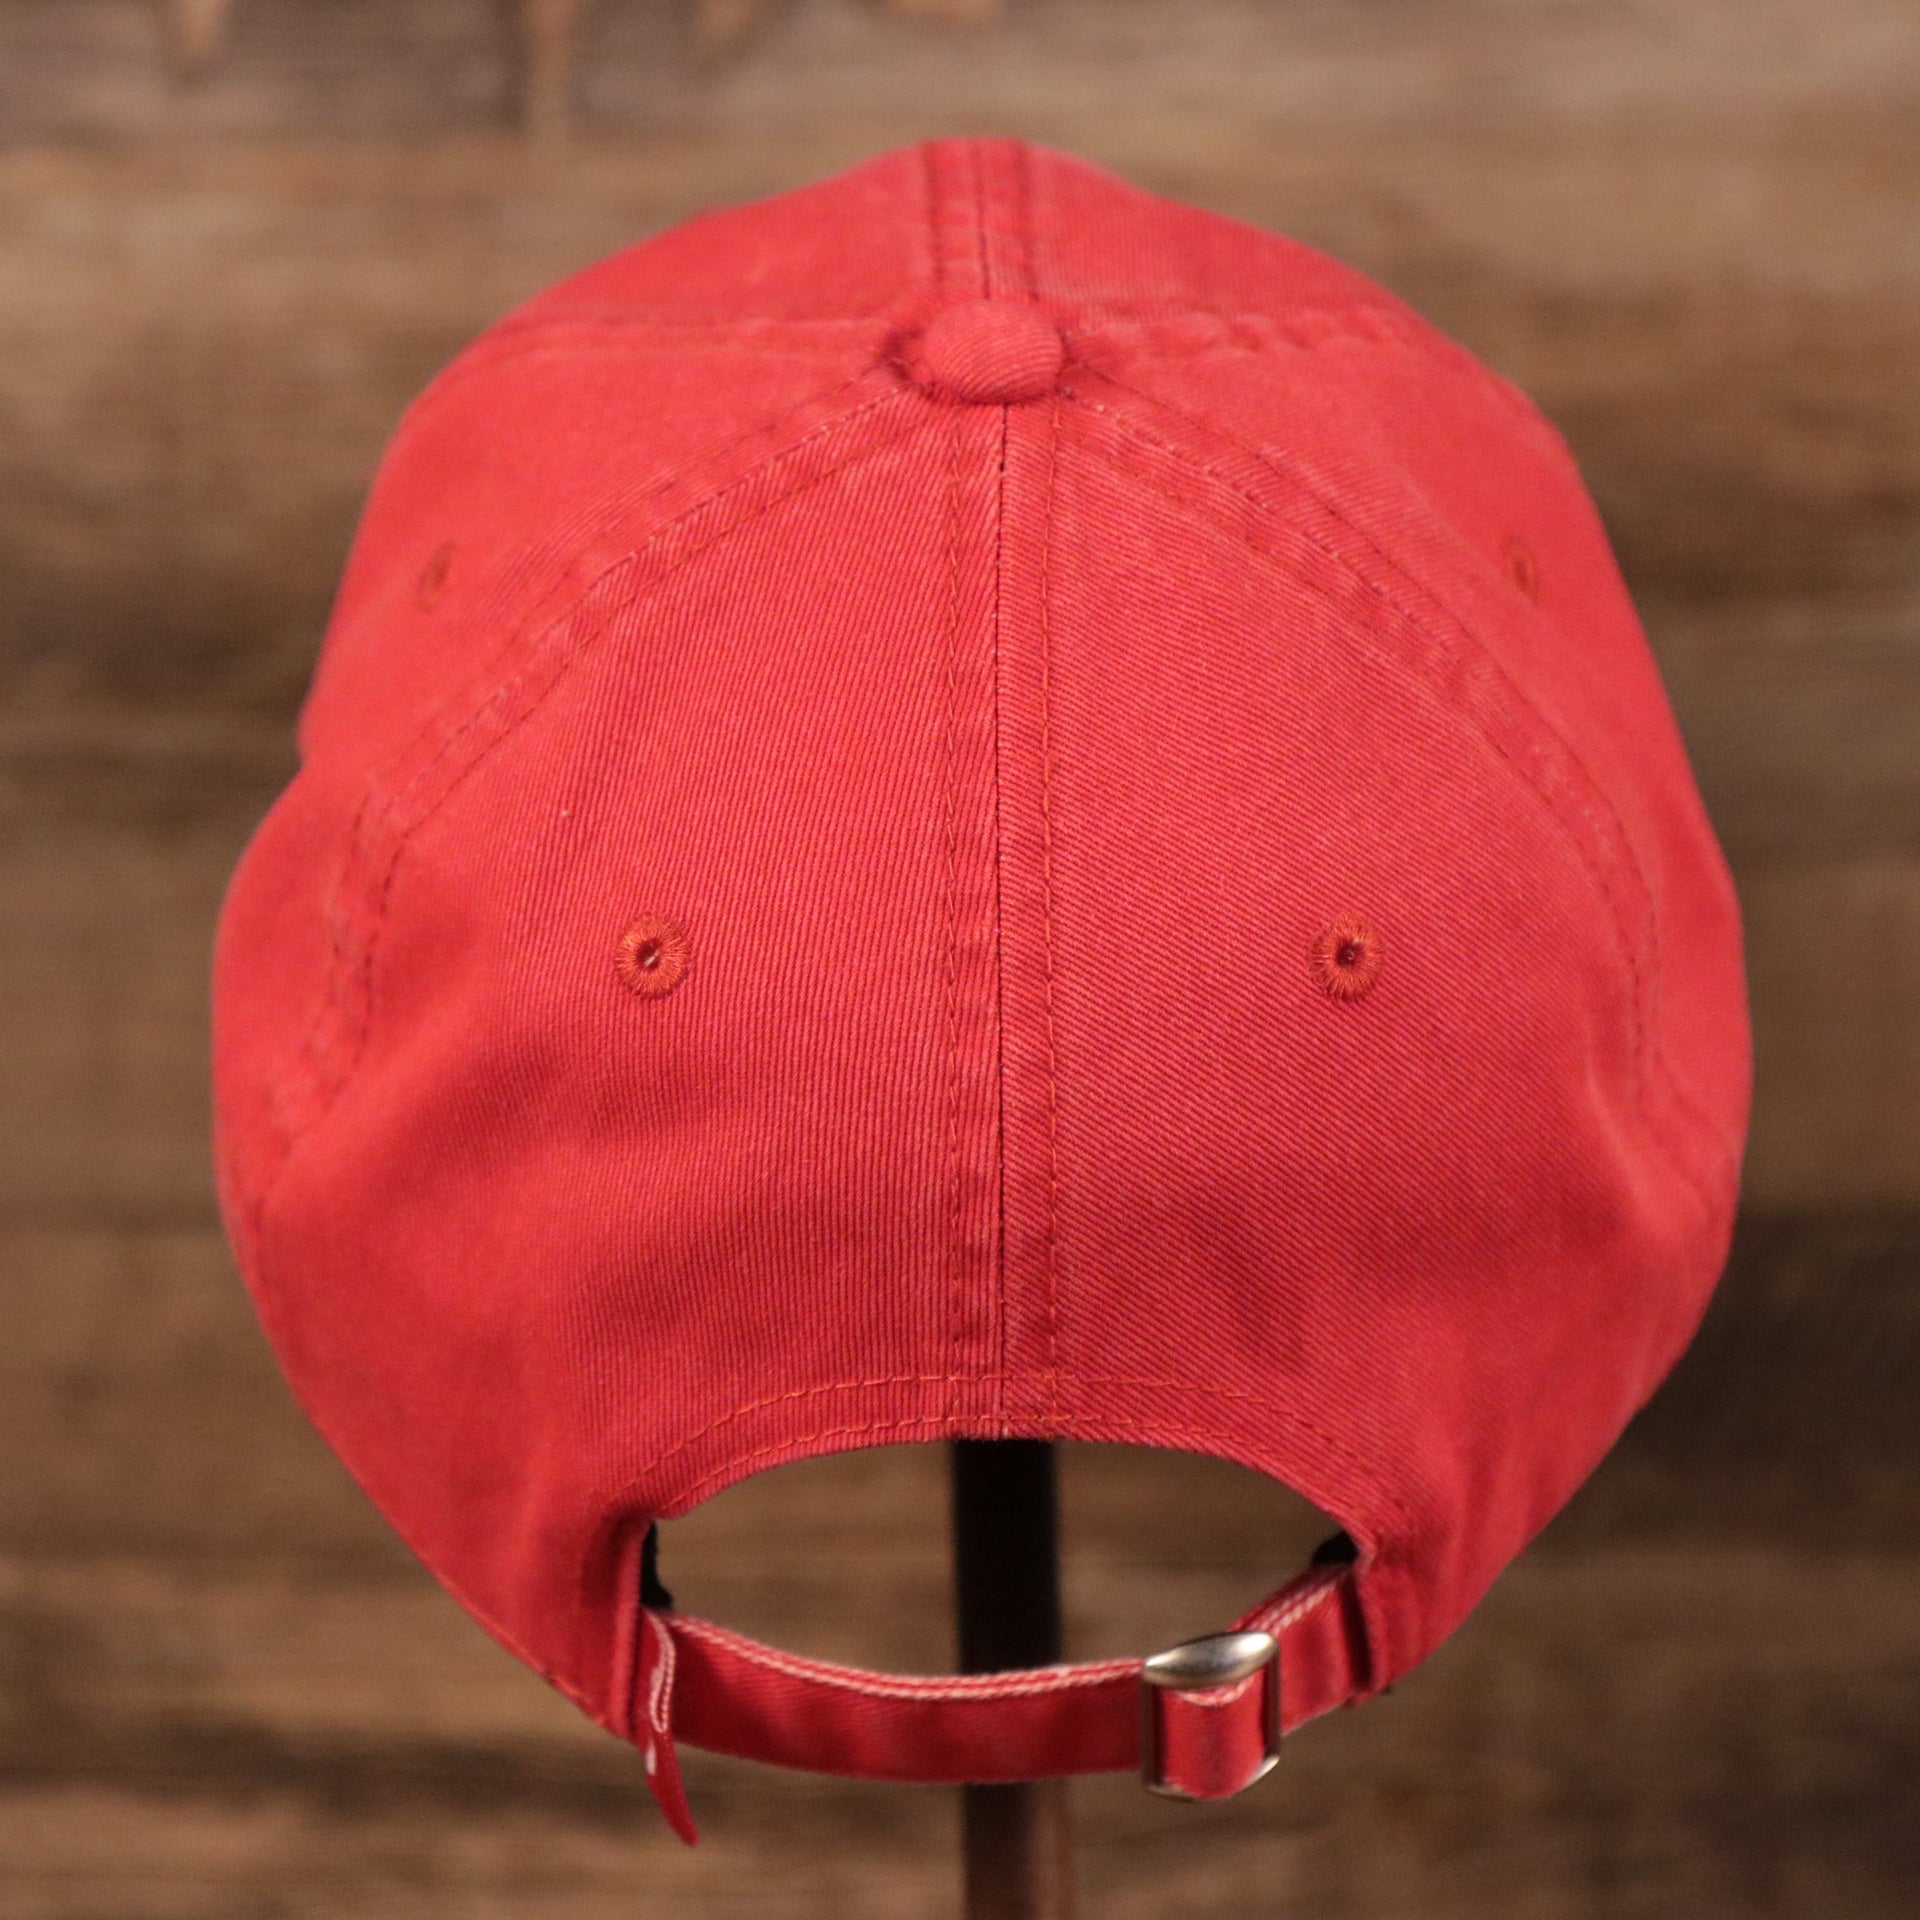 The adjustable strap at the backside of the washed pink Philadelphia Phillies baseball cap for women.